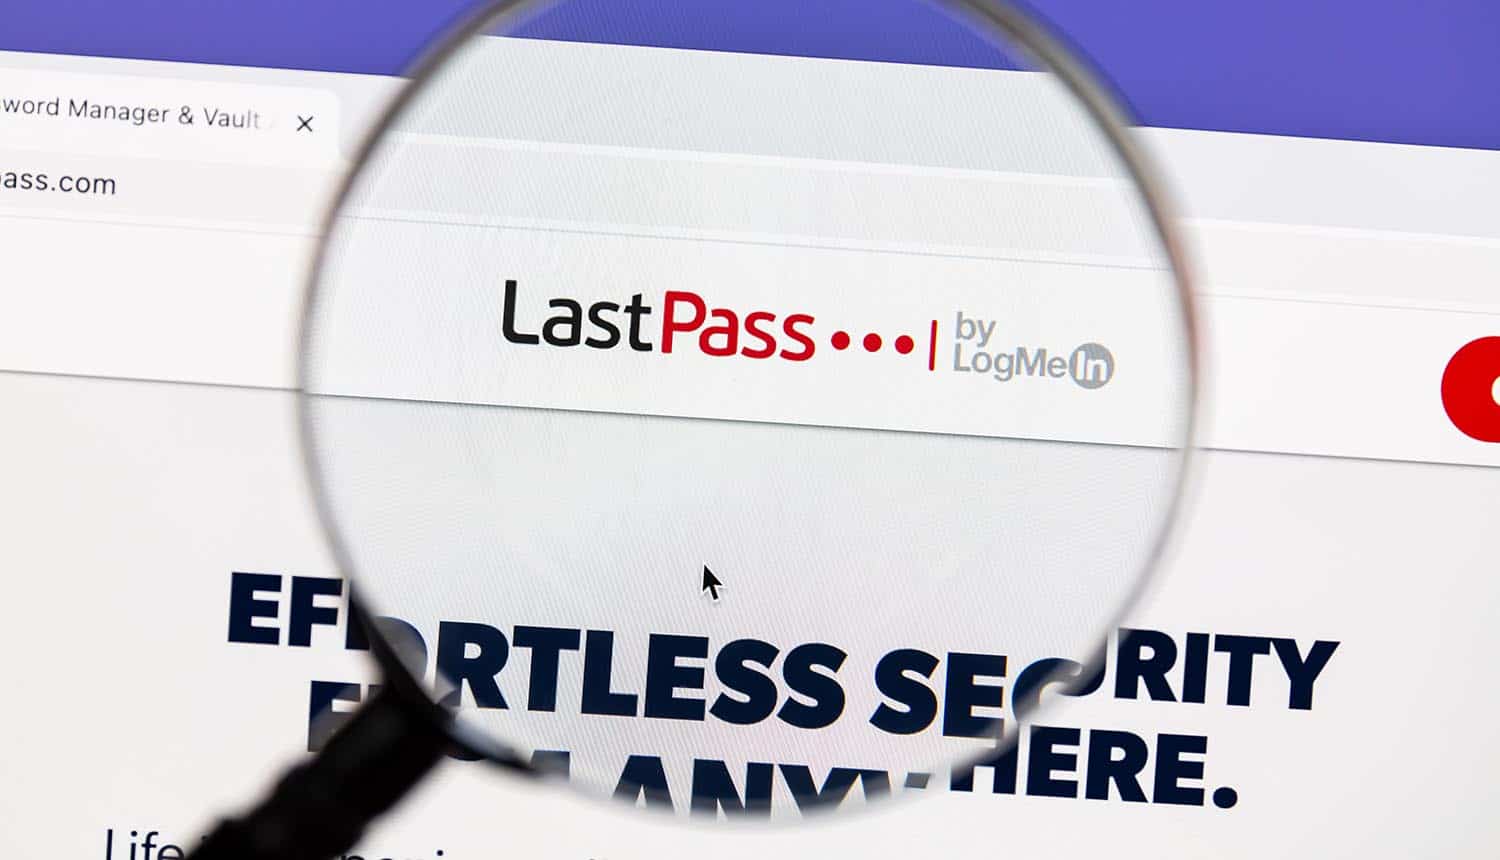 was anyone affected by lastpass breach